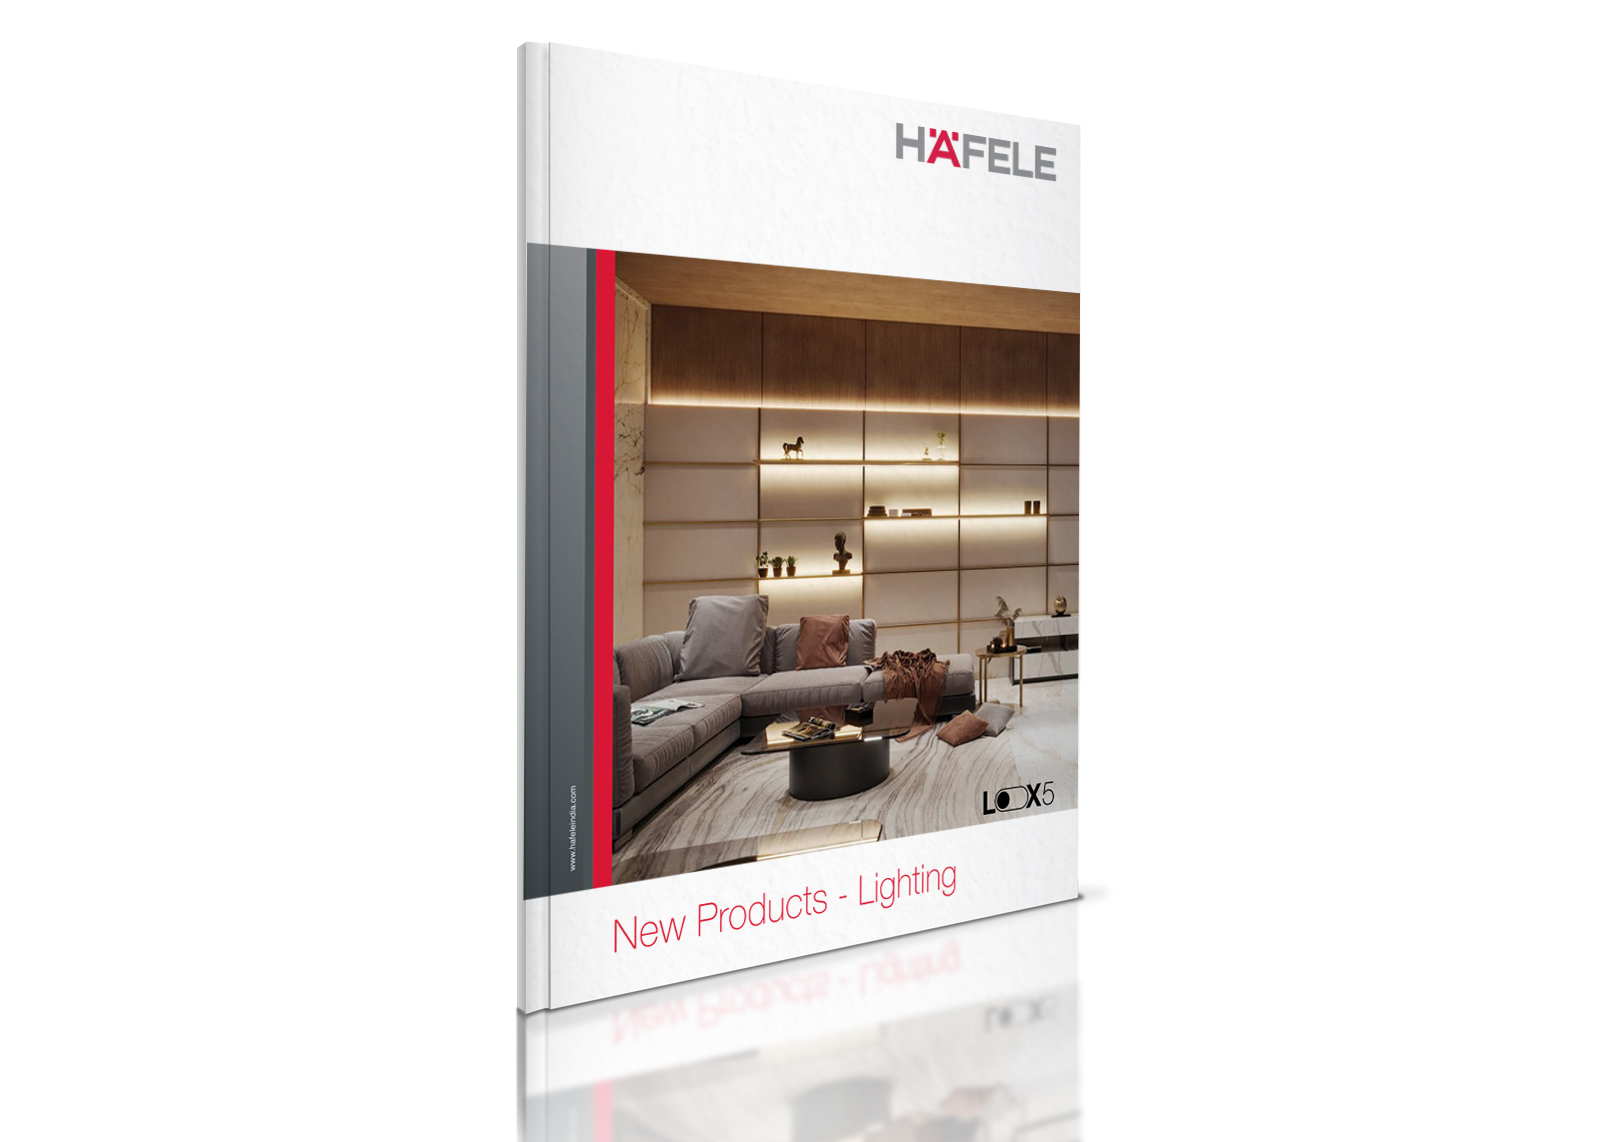 NewProducts - Lighting